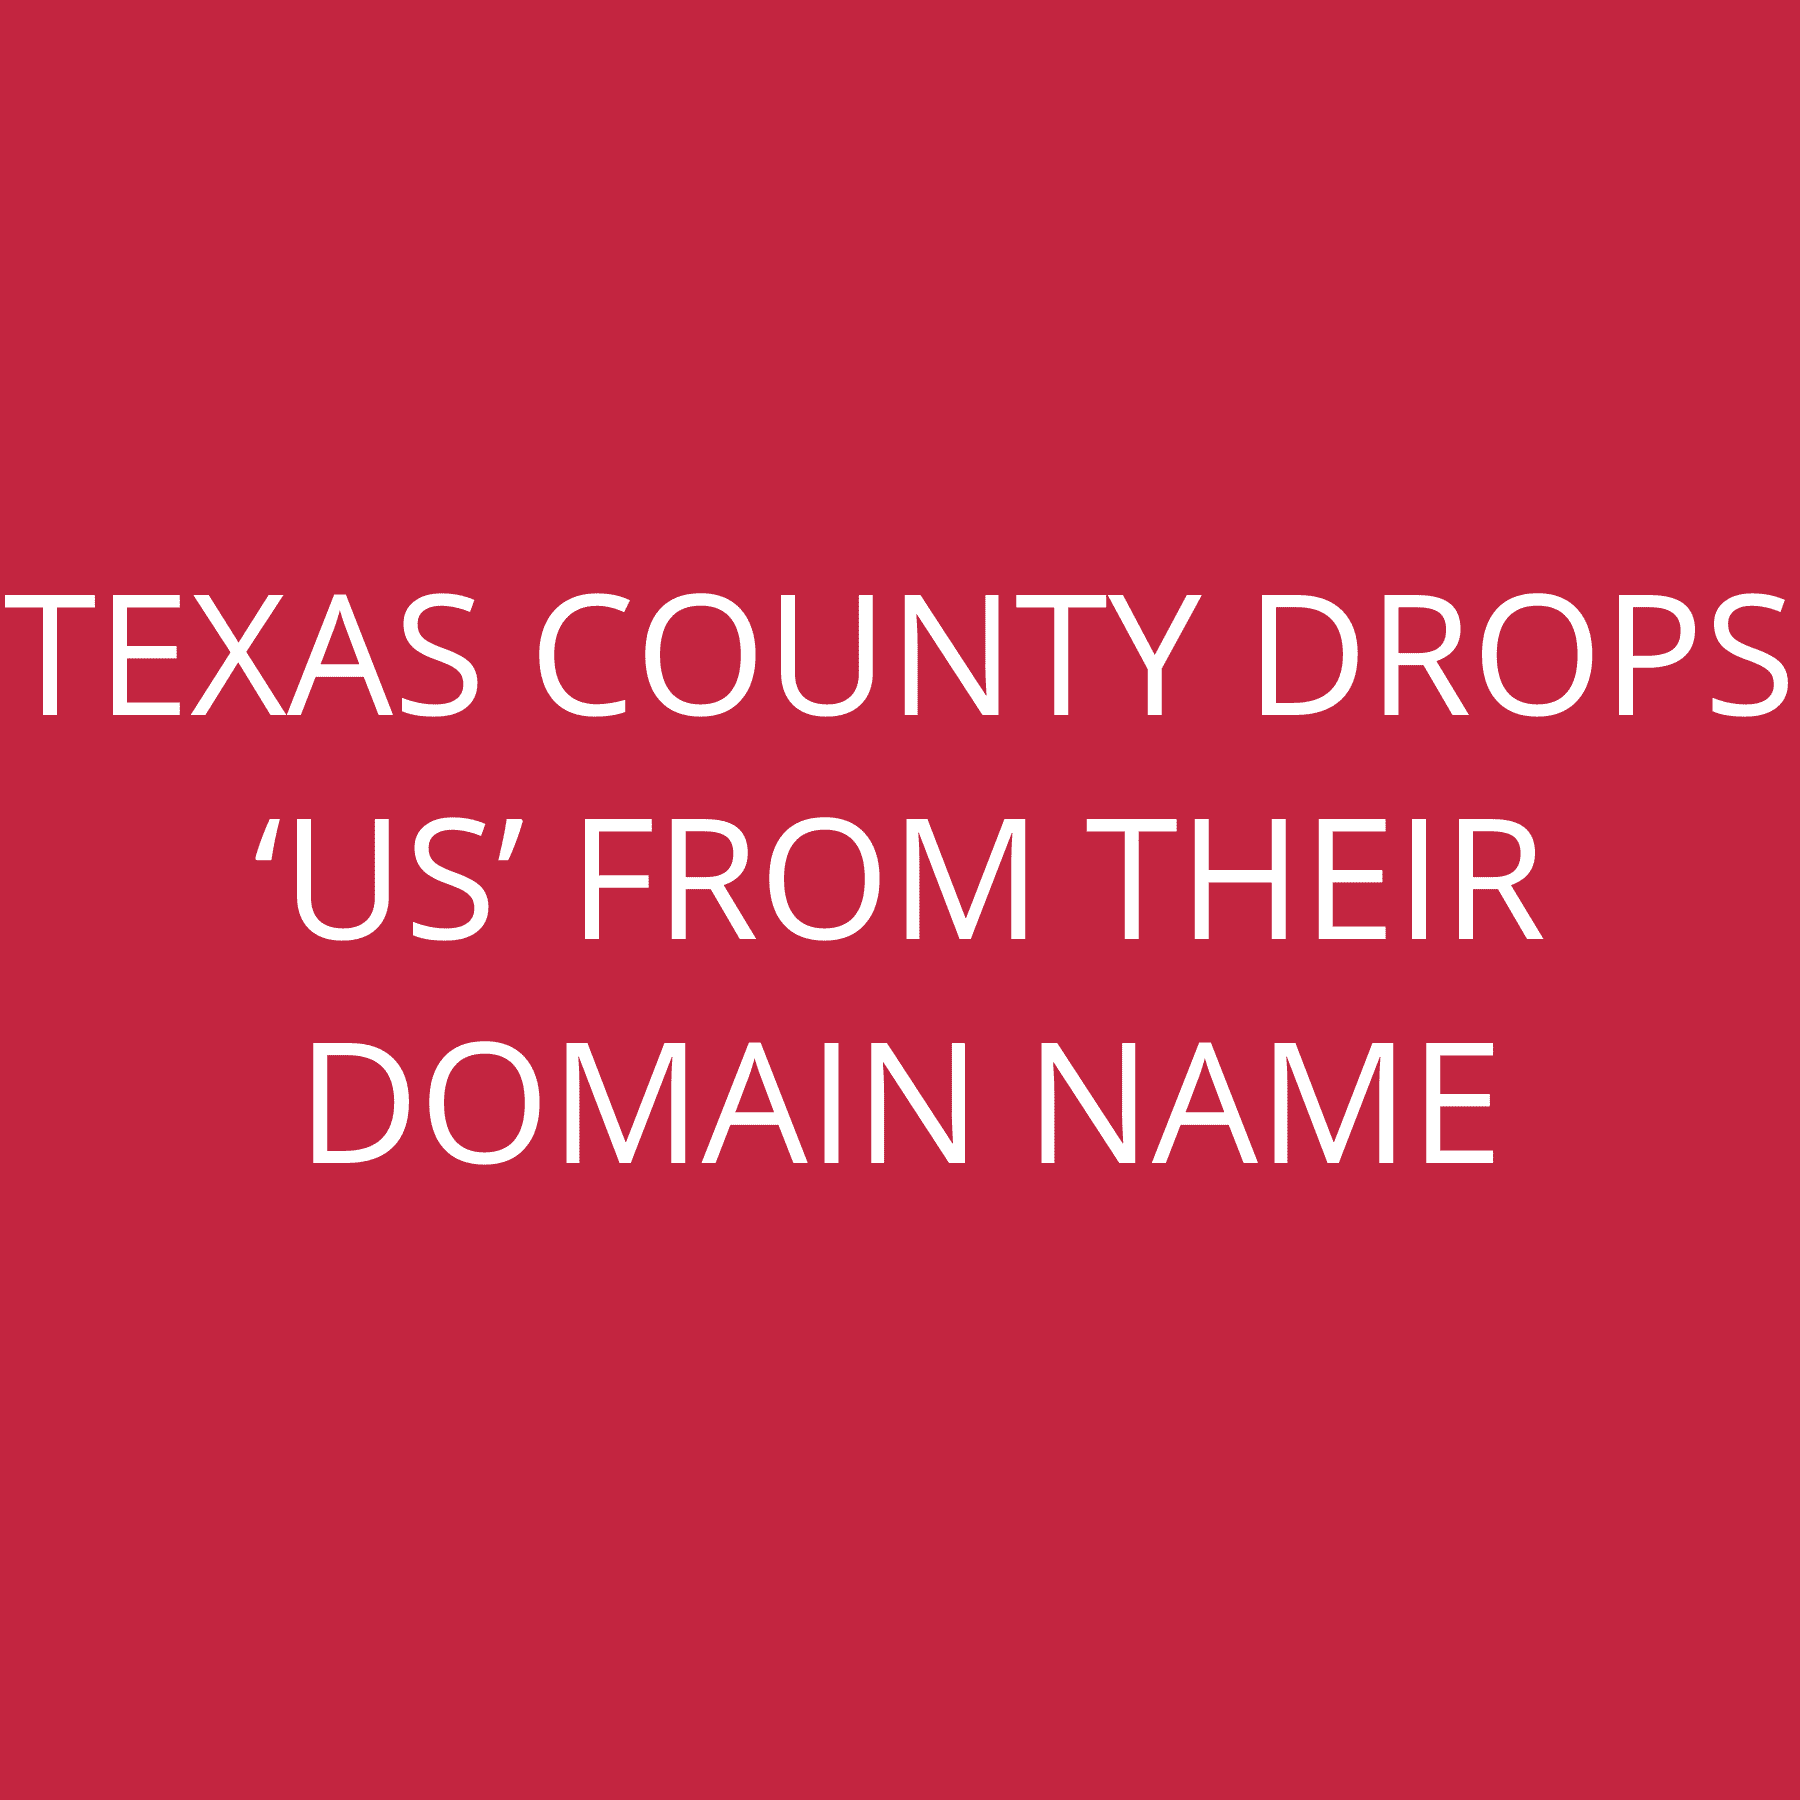 Texas county drops ‘us’ from their domain name